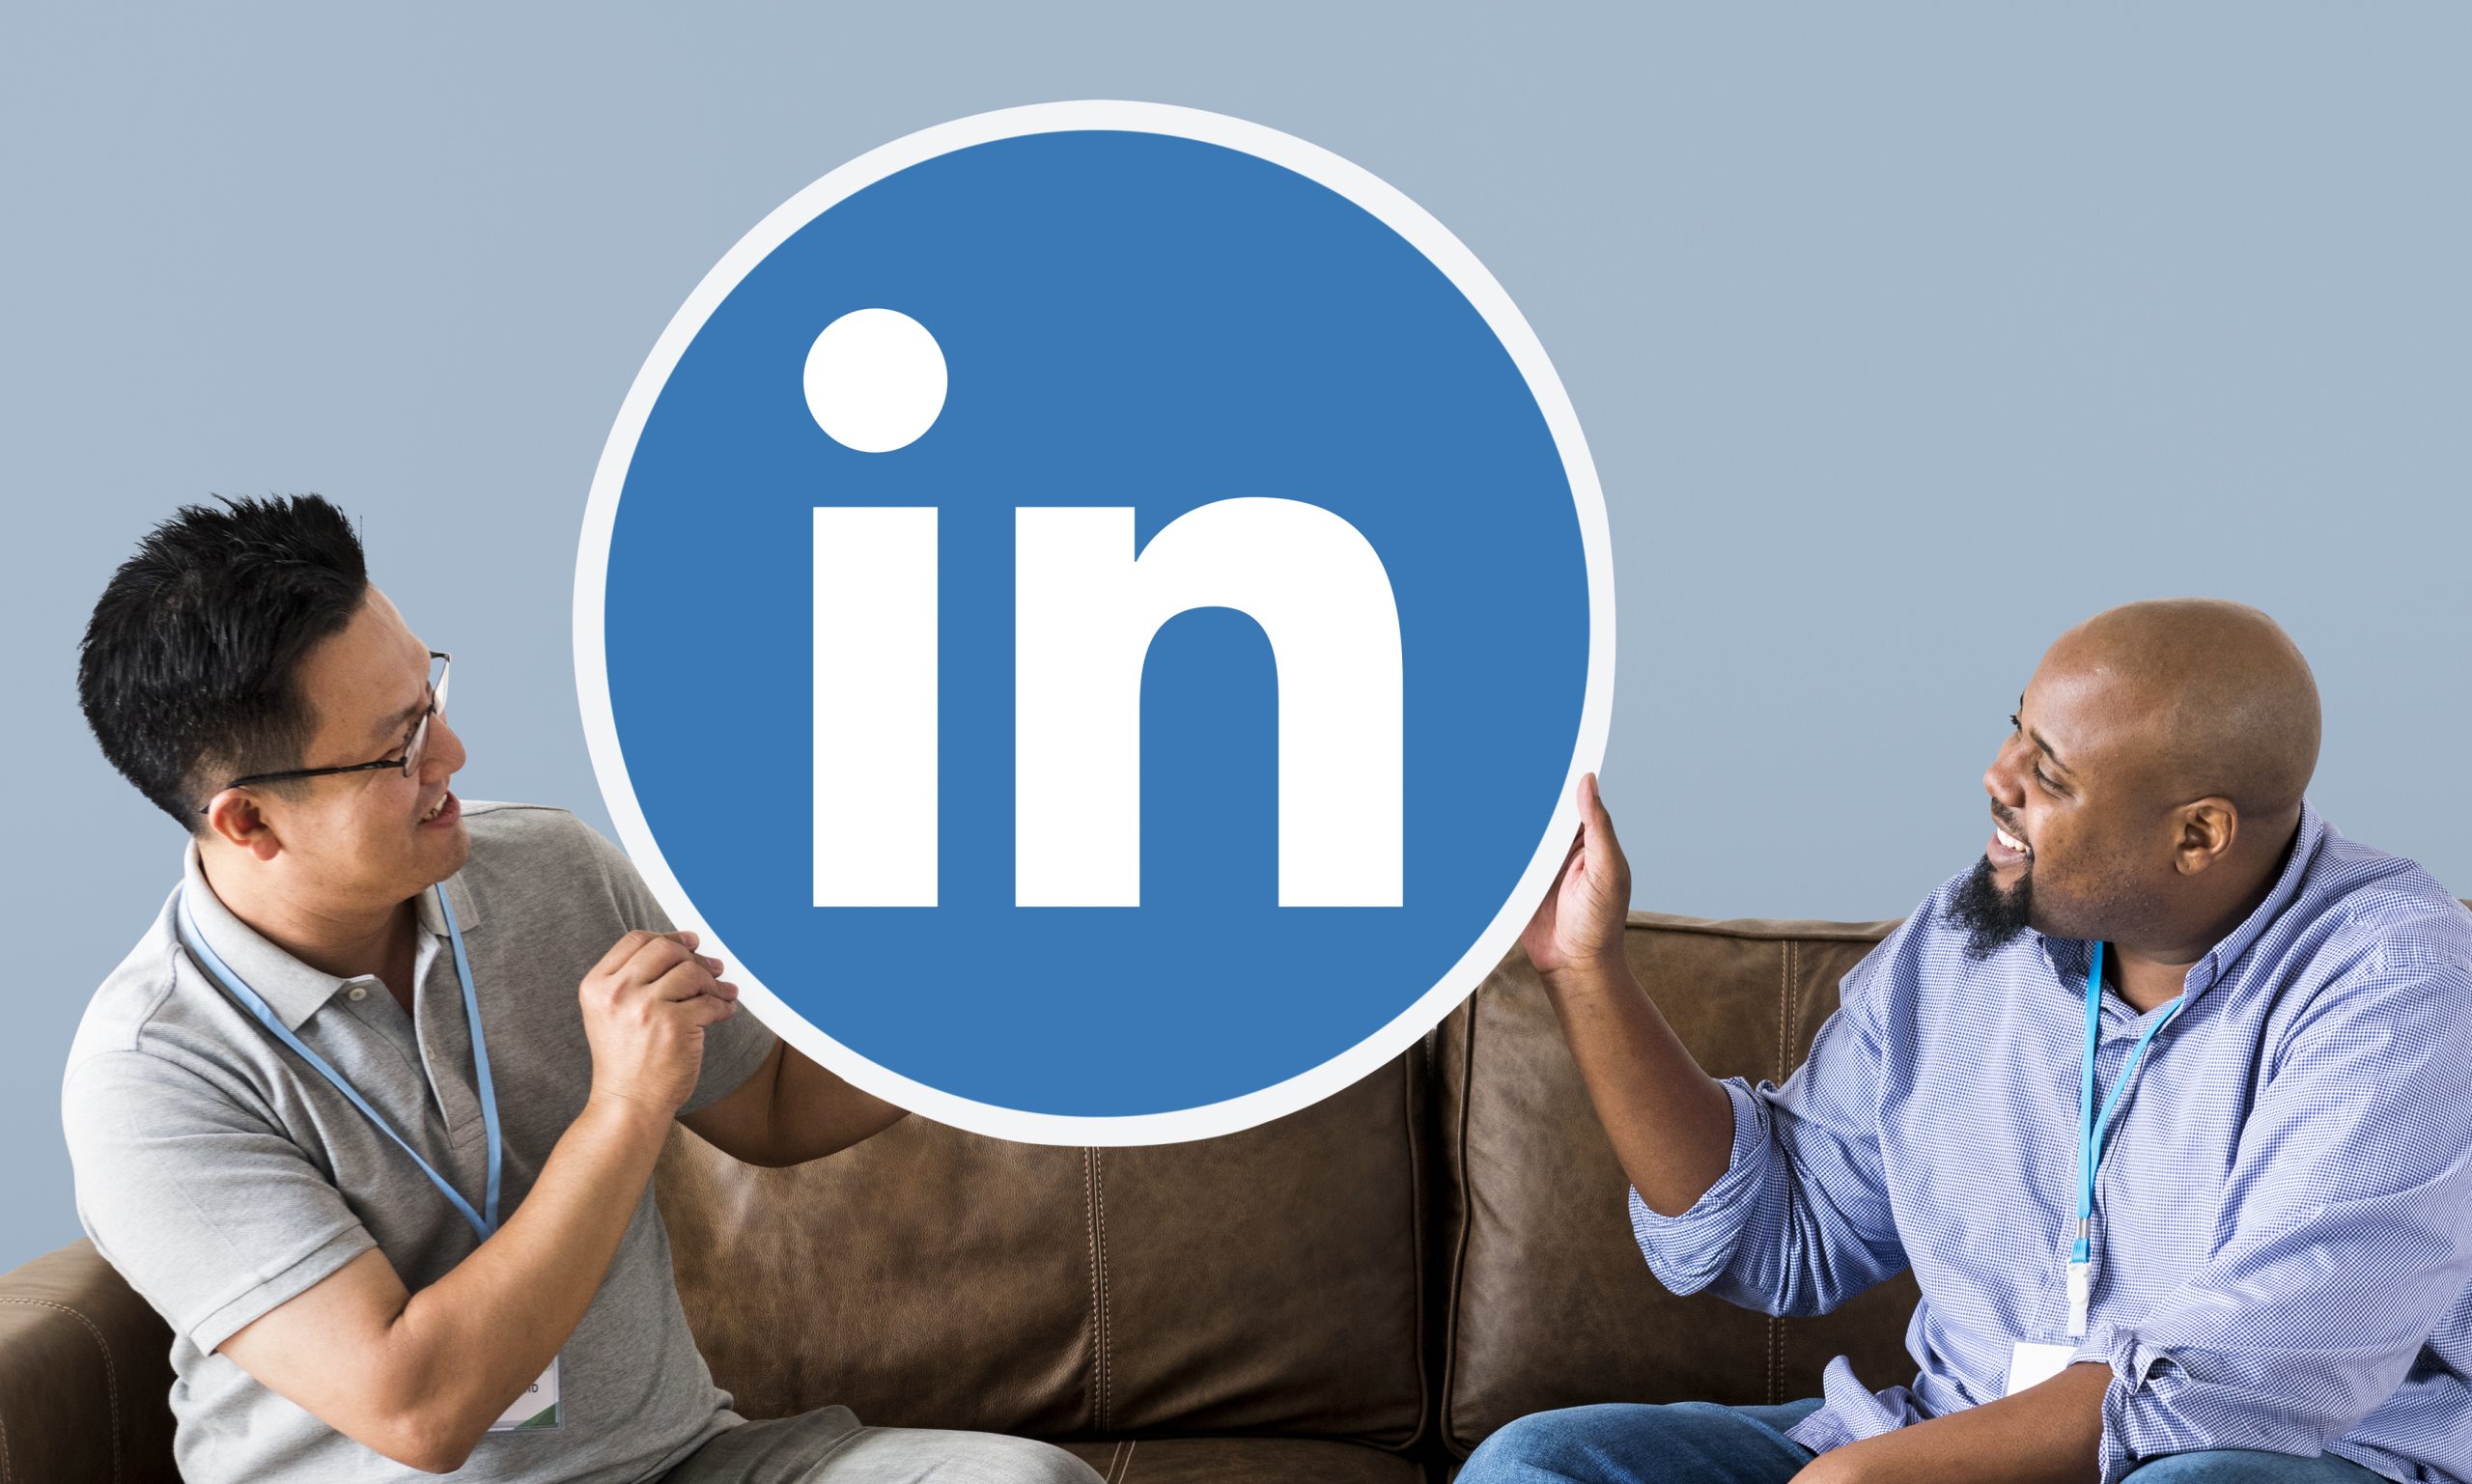 7 Tips for Optimizing Your LinkedIn Profile to Attract High-Paying Job Offers